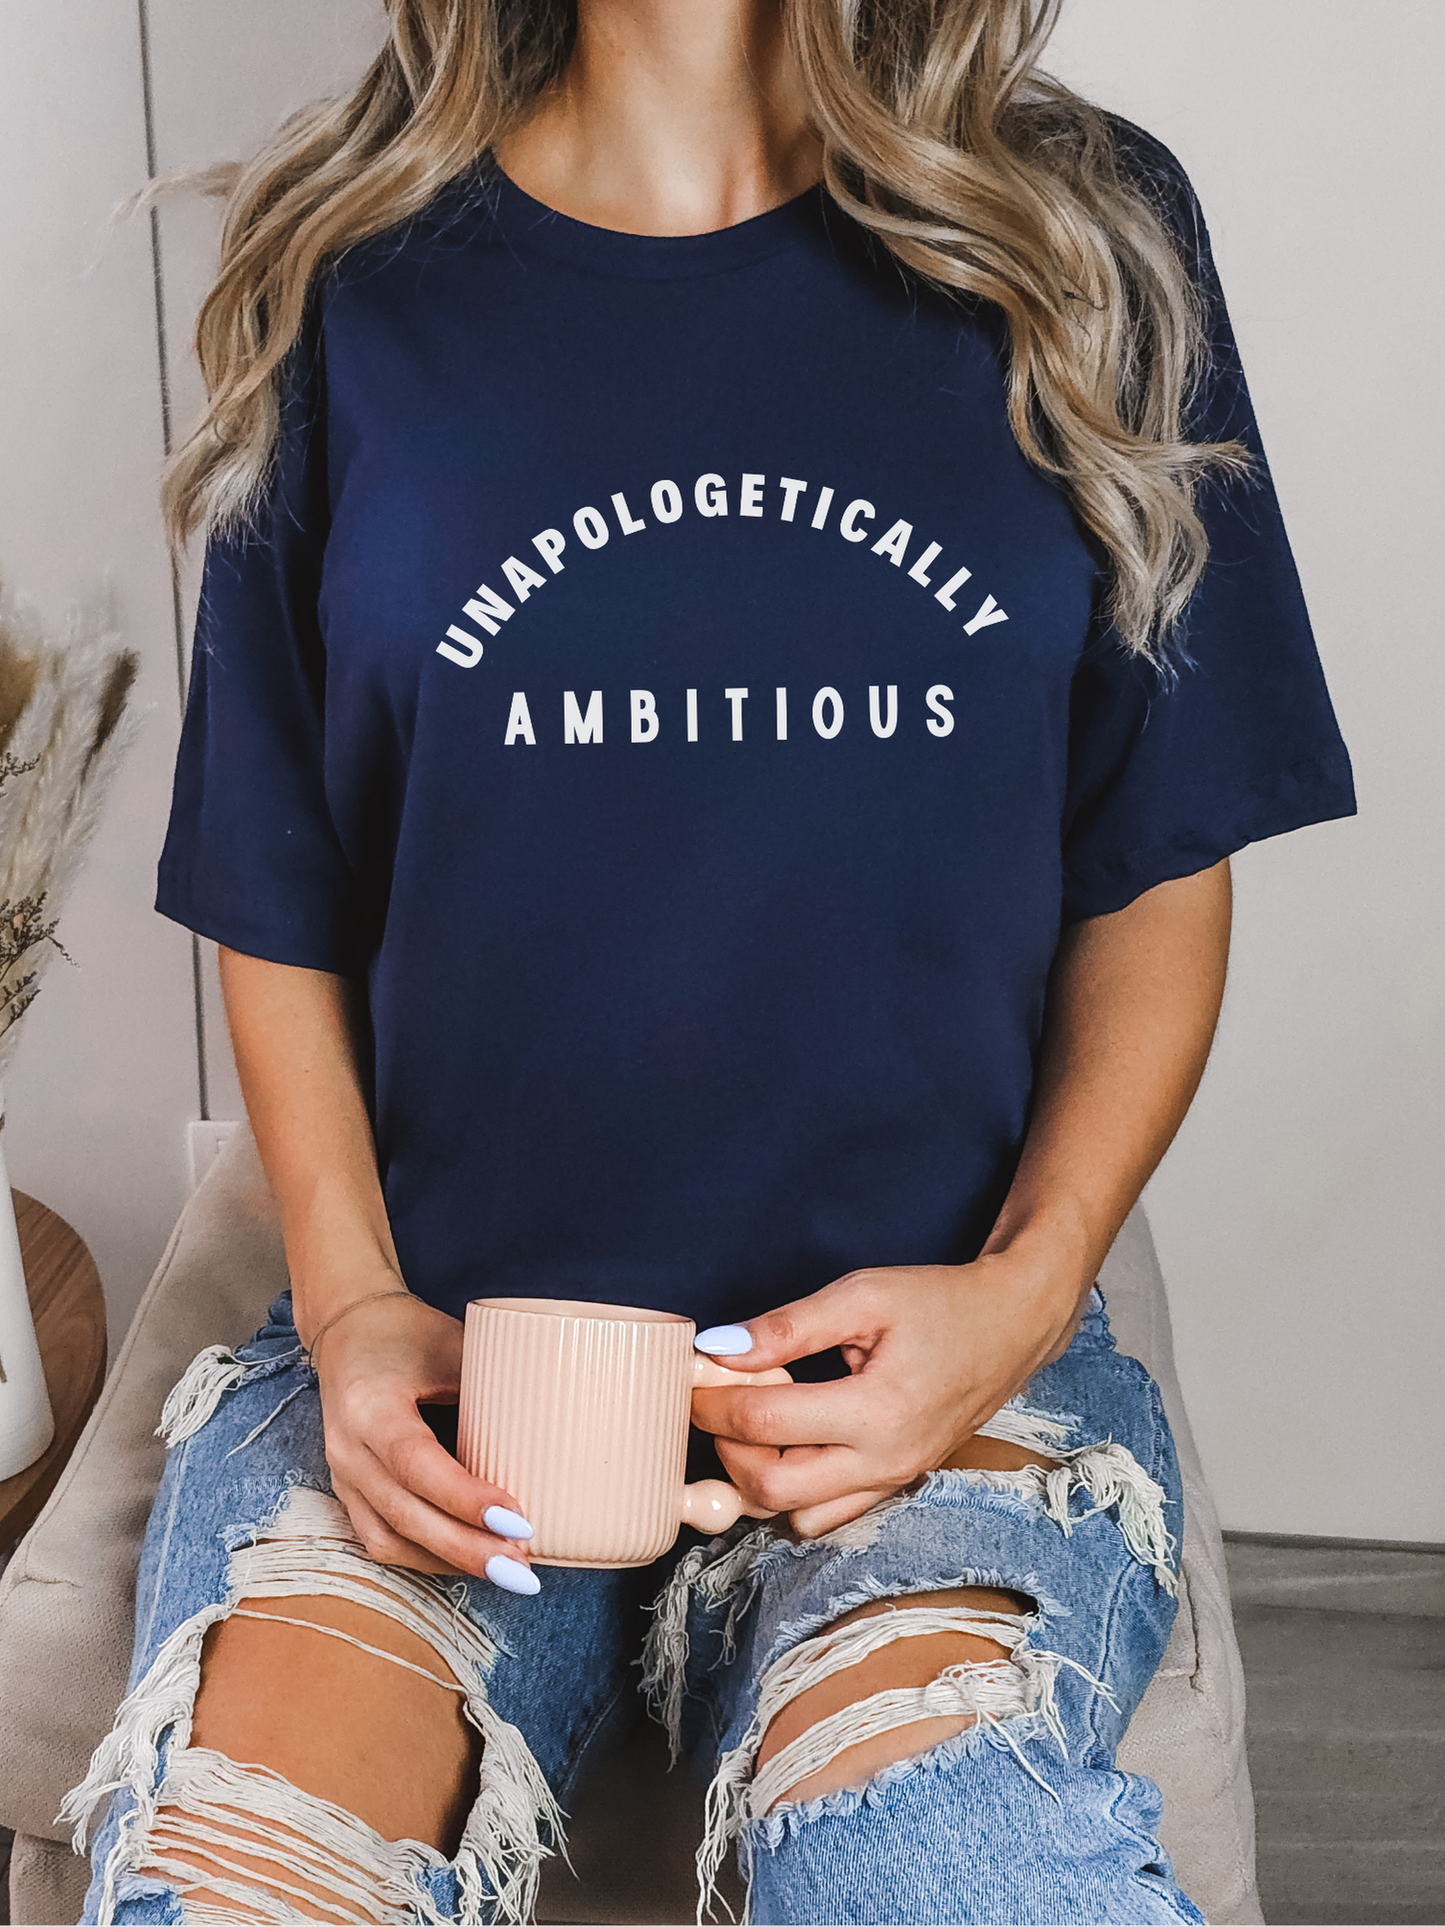 Unapologetically Ambitious Tee